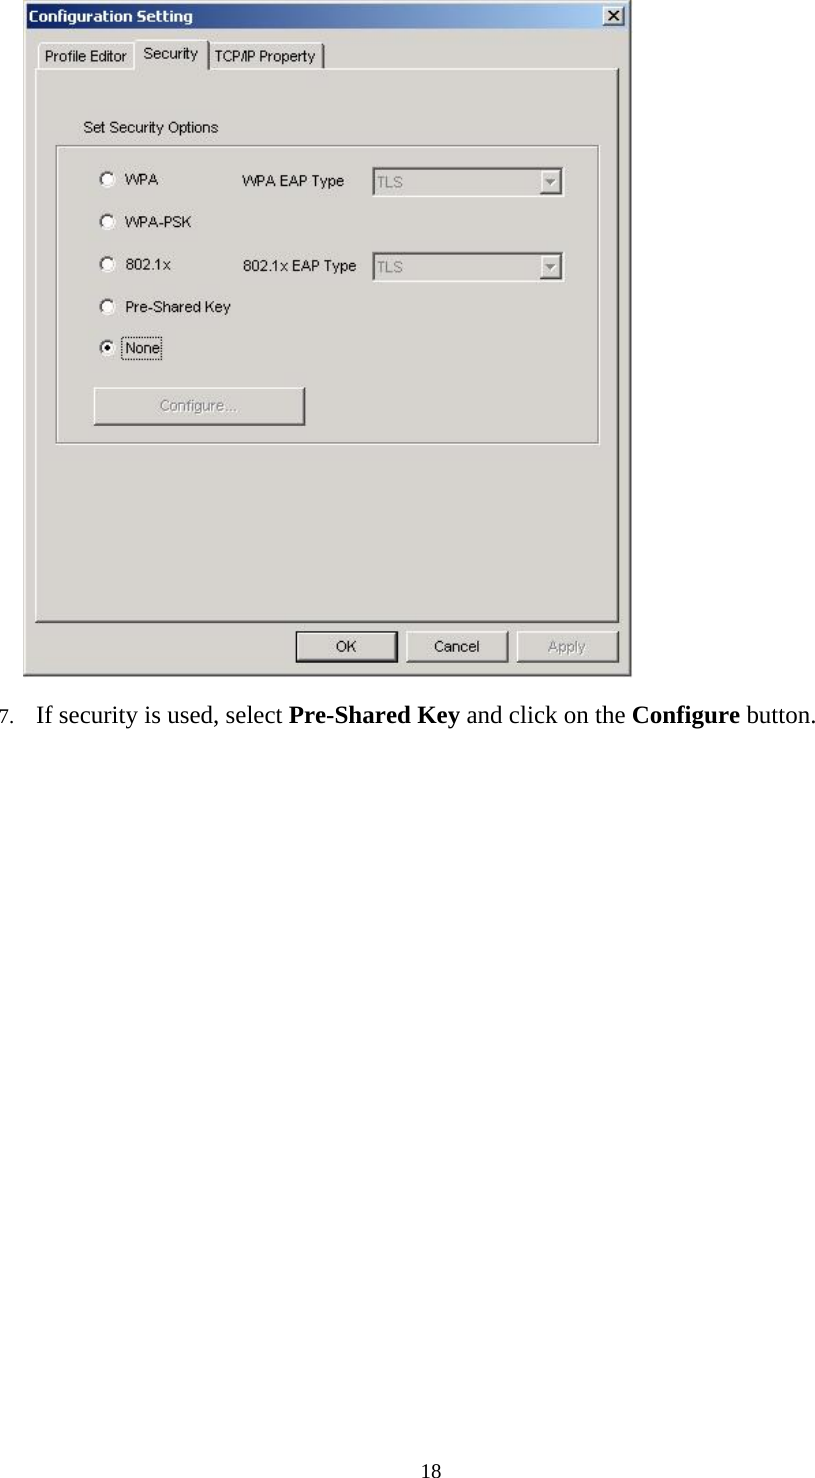  18    7. If security is used, select Pre-Shared Key and click on the Configure button.  